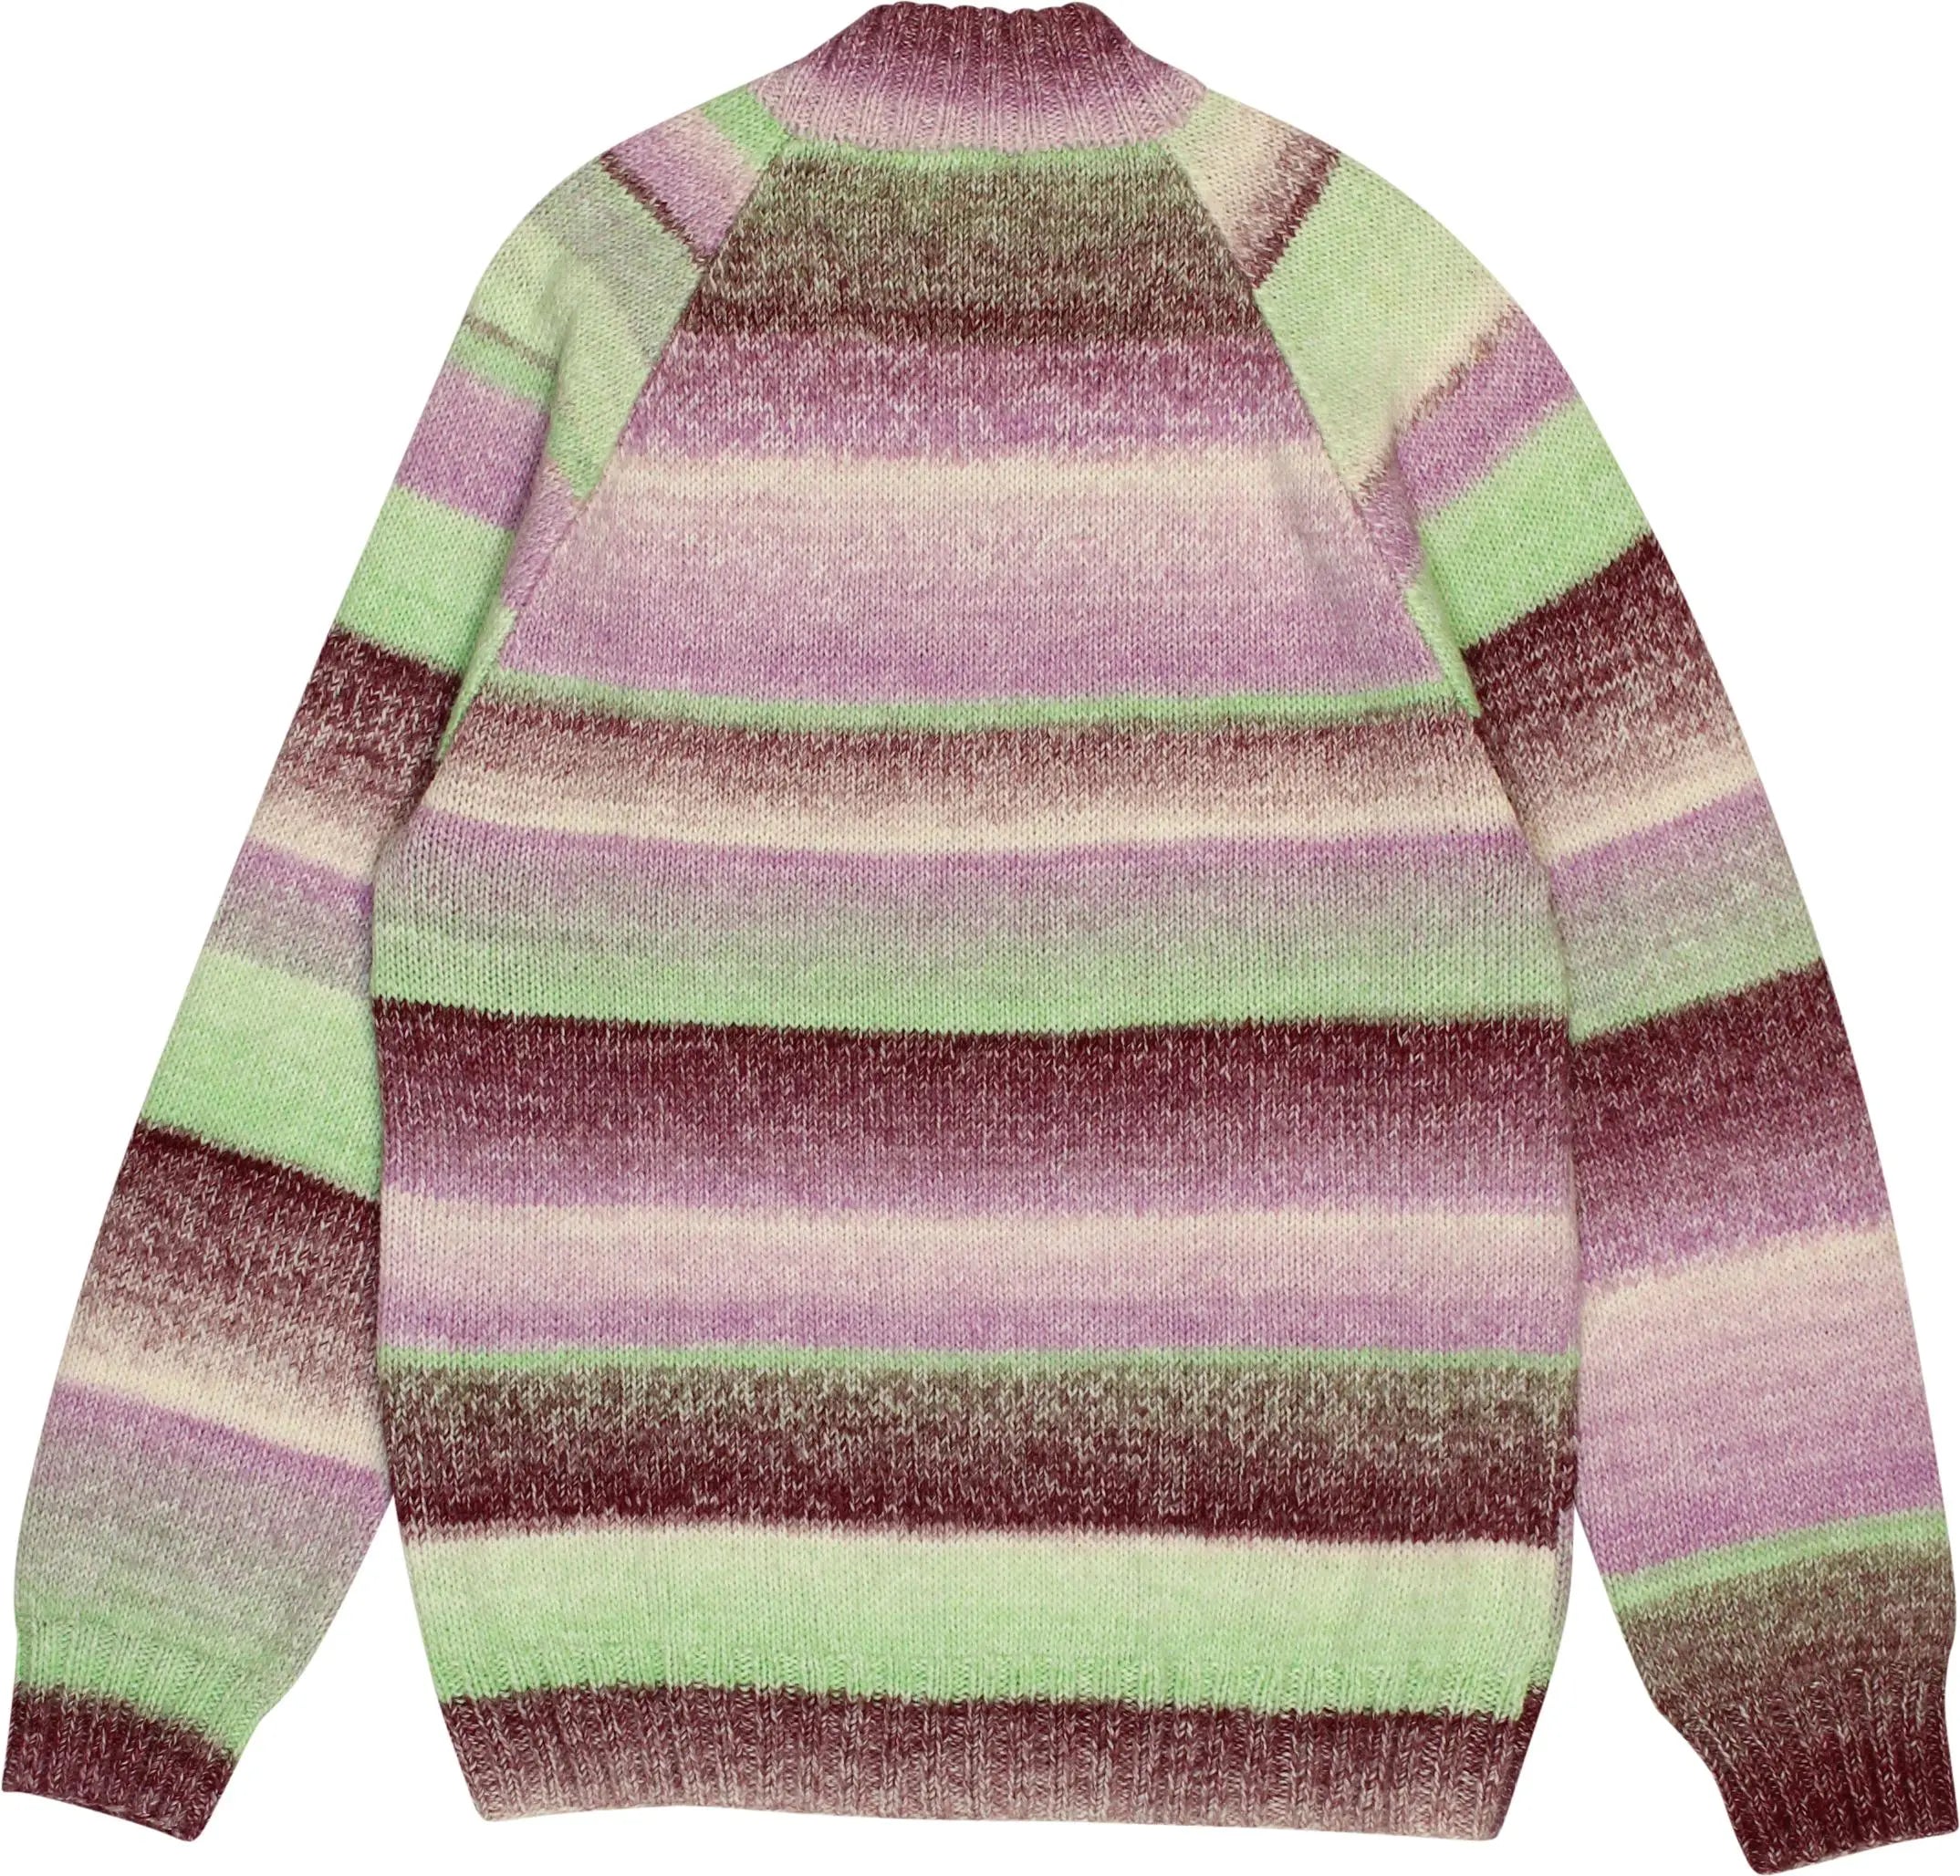 Handmade - Hand Knitted Jumper- ThriftTale.com - Vintage and second handclothing